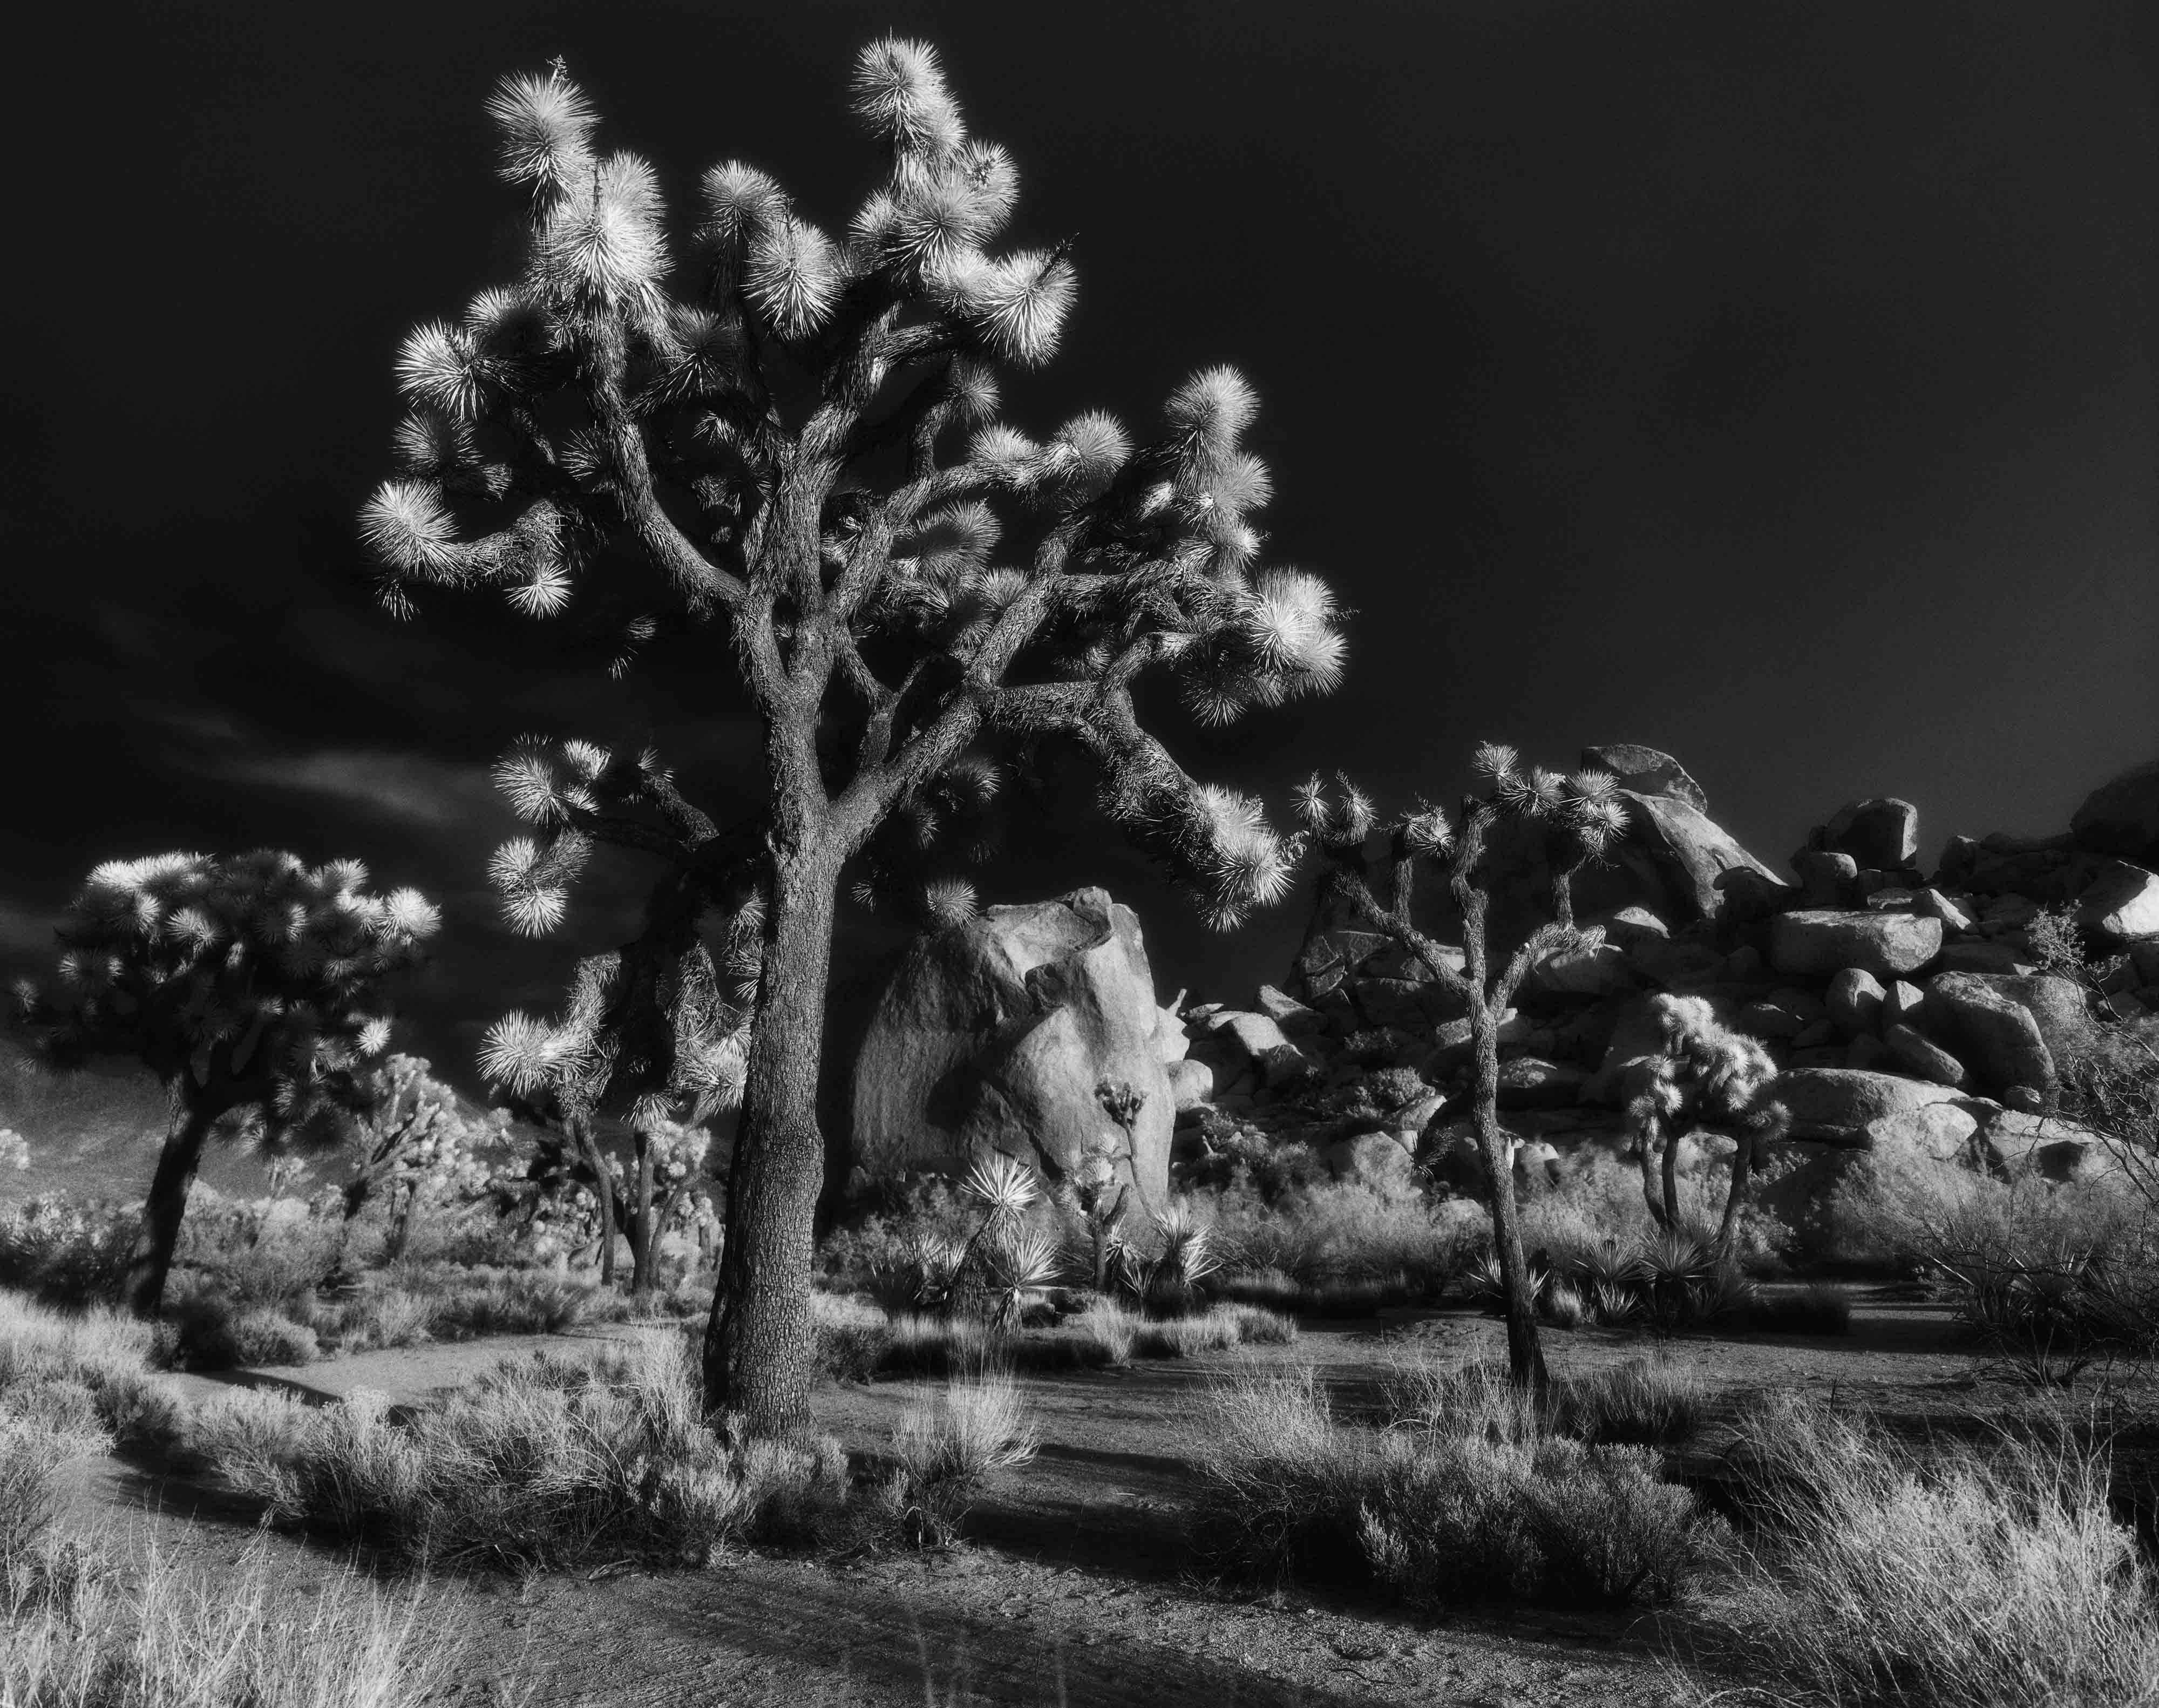 Cody S. Brothers Black and White Photograph - Landscape Photography 4" x 5": 'J Tree 2016'